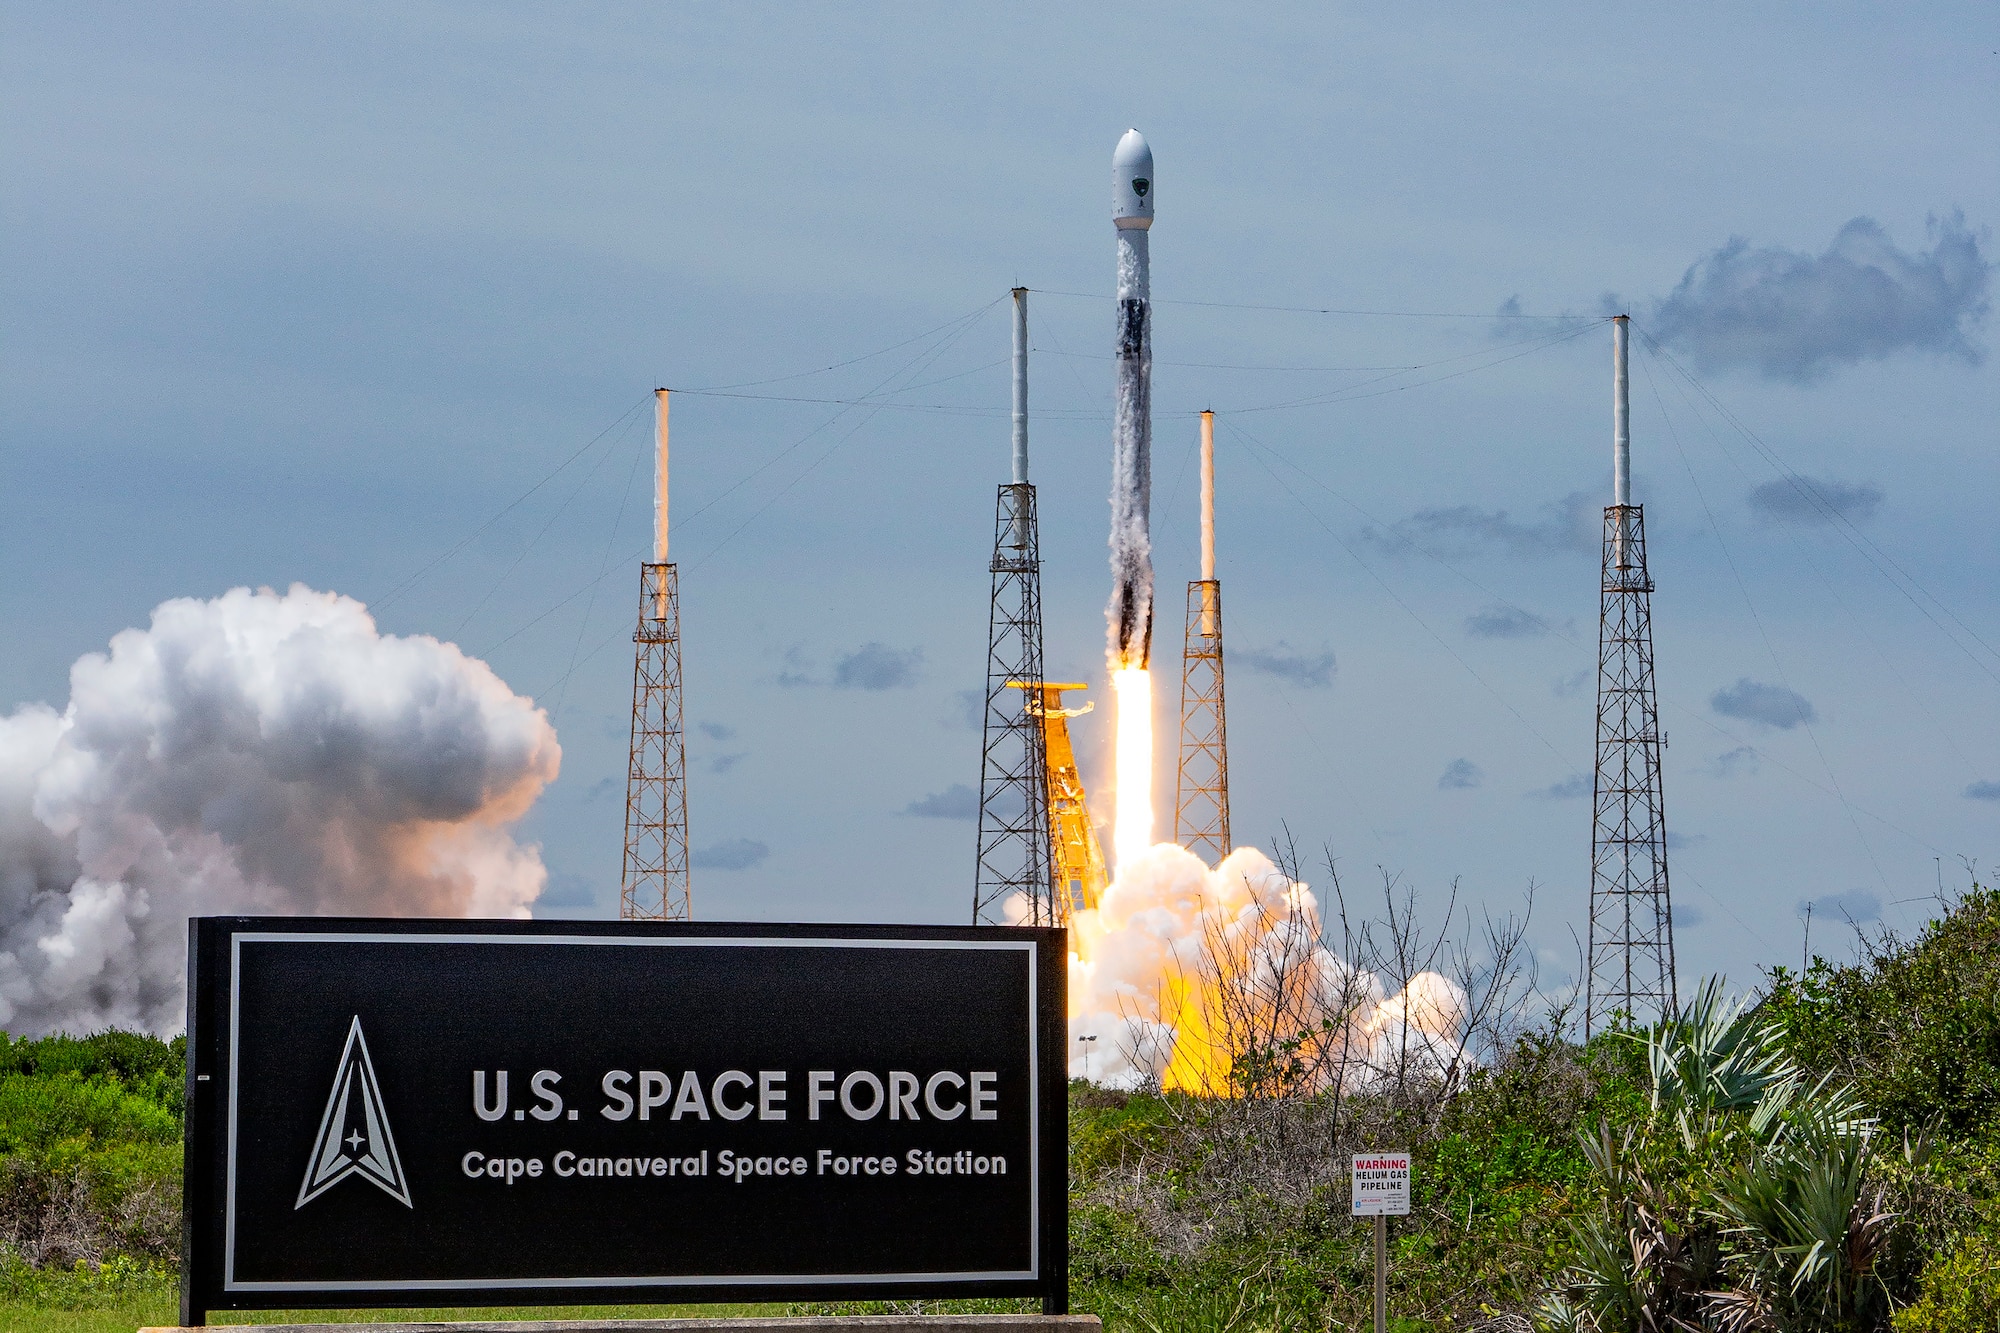 Under the power of nine Merlin engines, a SpaceX Falcon 9 launch vehicle, lifts off from Space Launch Complex-40 at Cape Canaveral Space Force Station at 12:09 p.m. EDT (9:09 am. PDT) June 17, carrying the fifth Lockheed Martin-built Global Positioning Systems (GPS) III Space Vehicle (SV05) into Medium Earth Orbit for the U.S. Space Force. (Courtesy Photo by SpaceX)